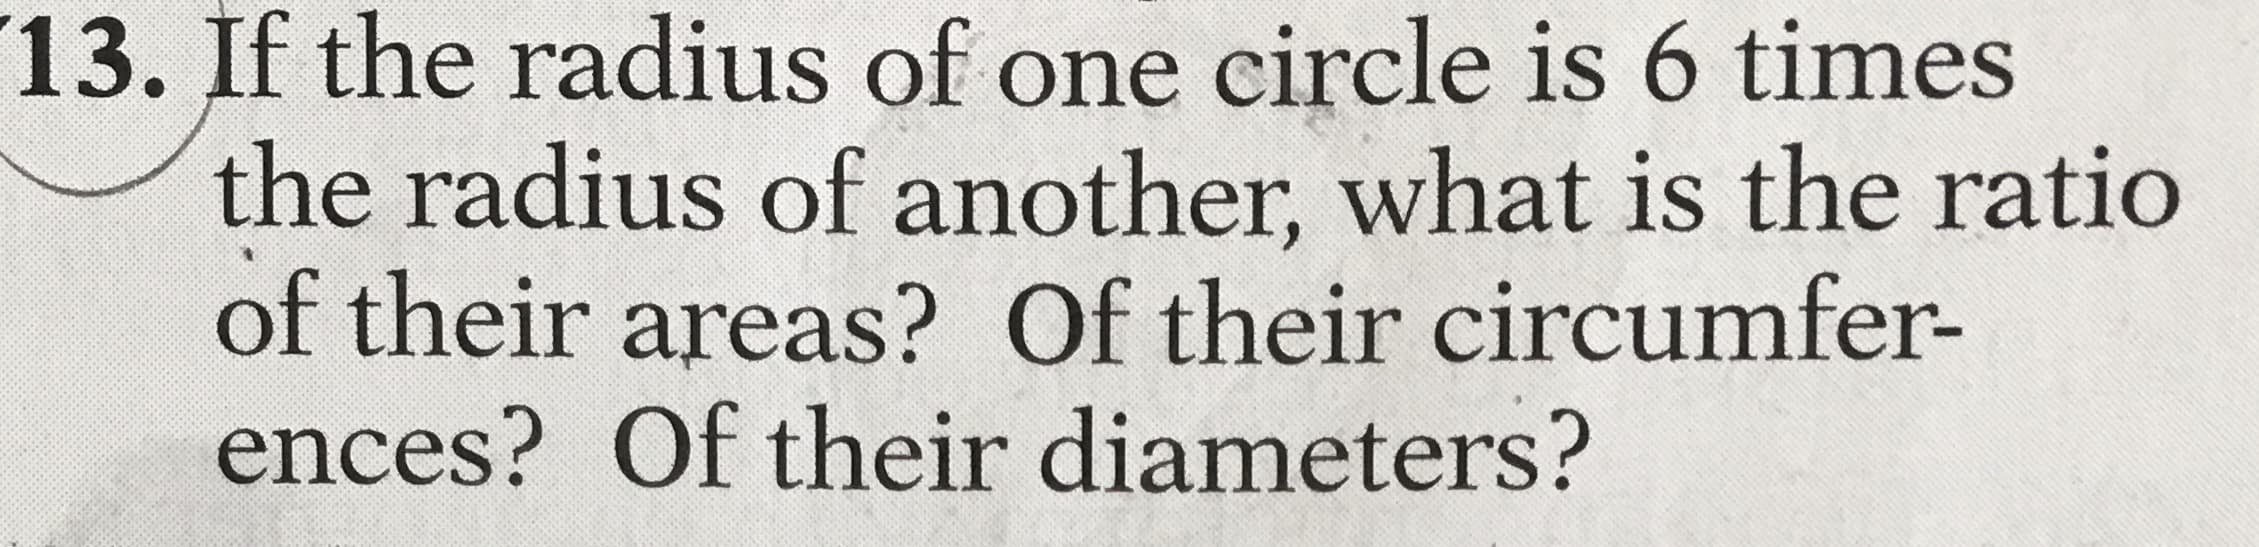 If the radius of one circle is 6 times
the radius of another, what is the ratio
of their areas? Of their circumfer-
ences? Of their diameters?
